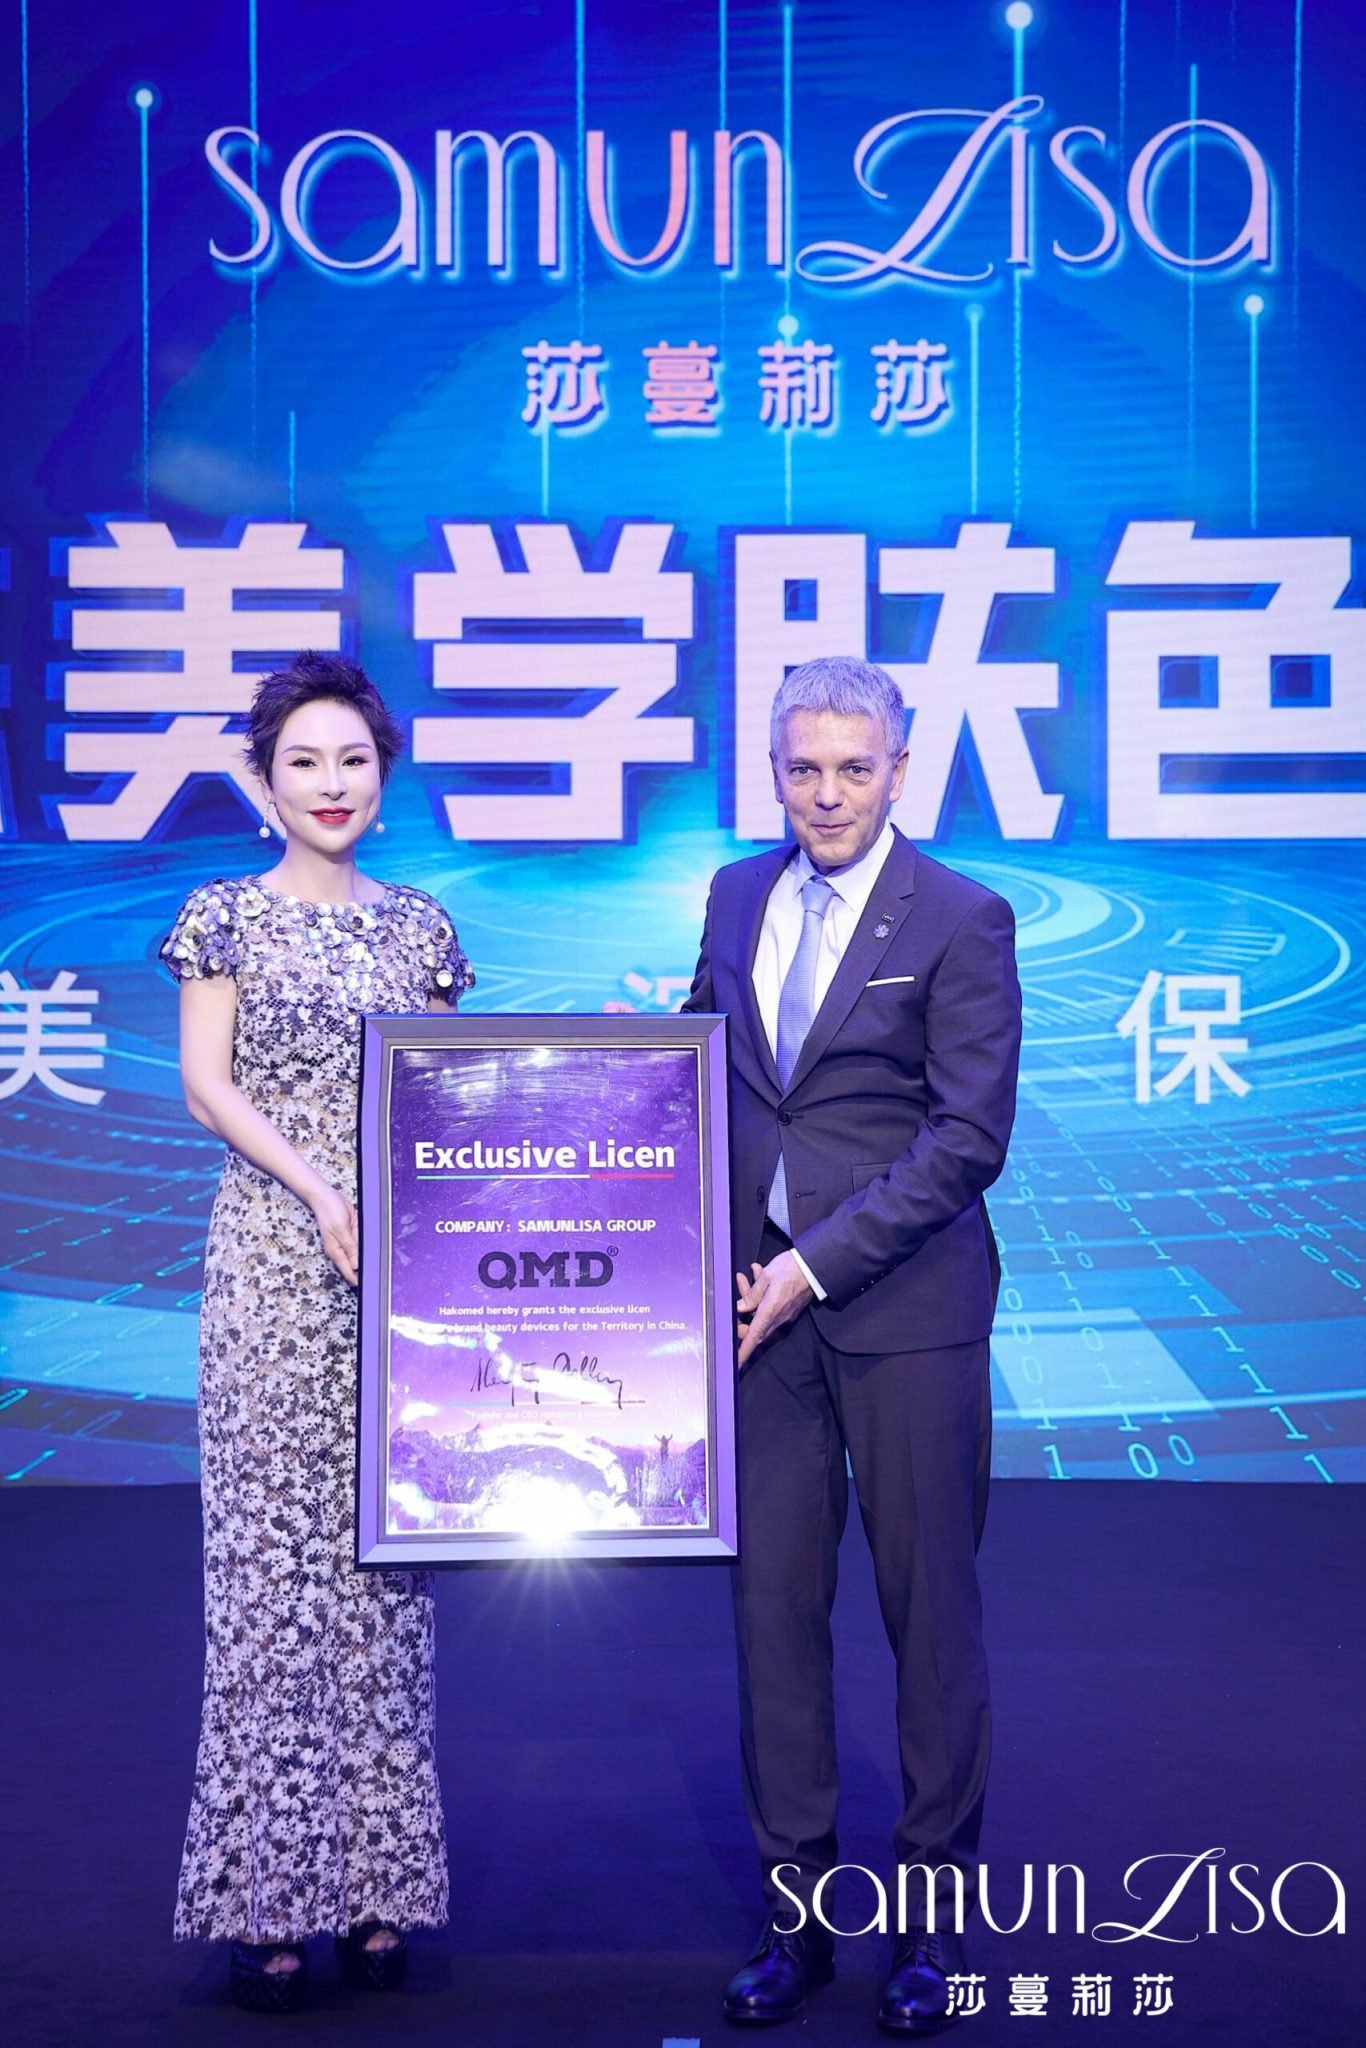 qmd® becomes exclusive partner of the SamunLisa Group in China